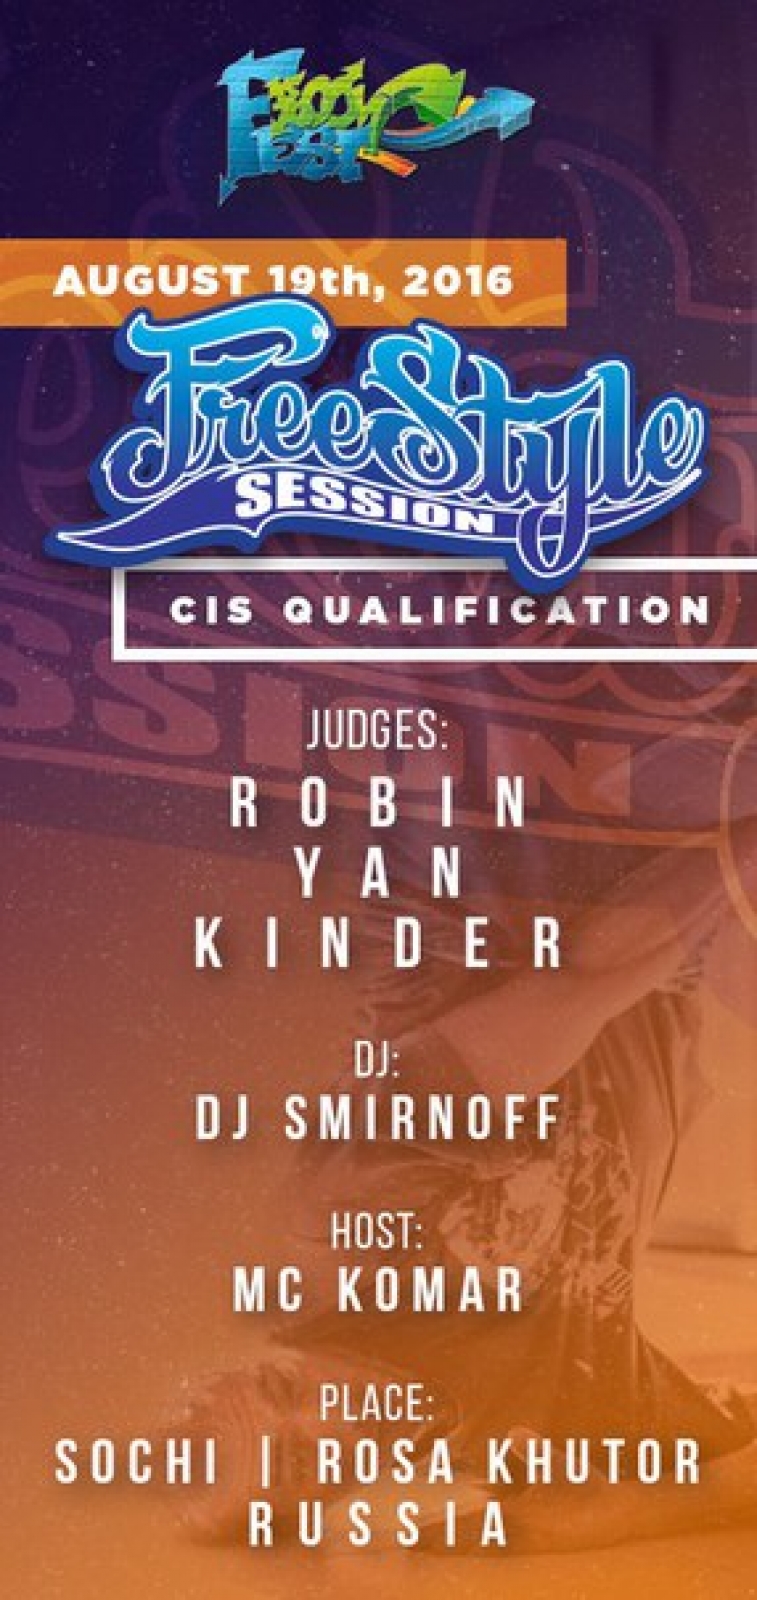 FREESTYLE SESSION CIS QUALIFICATION poster